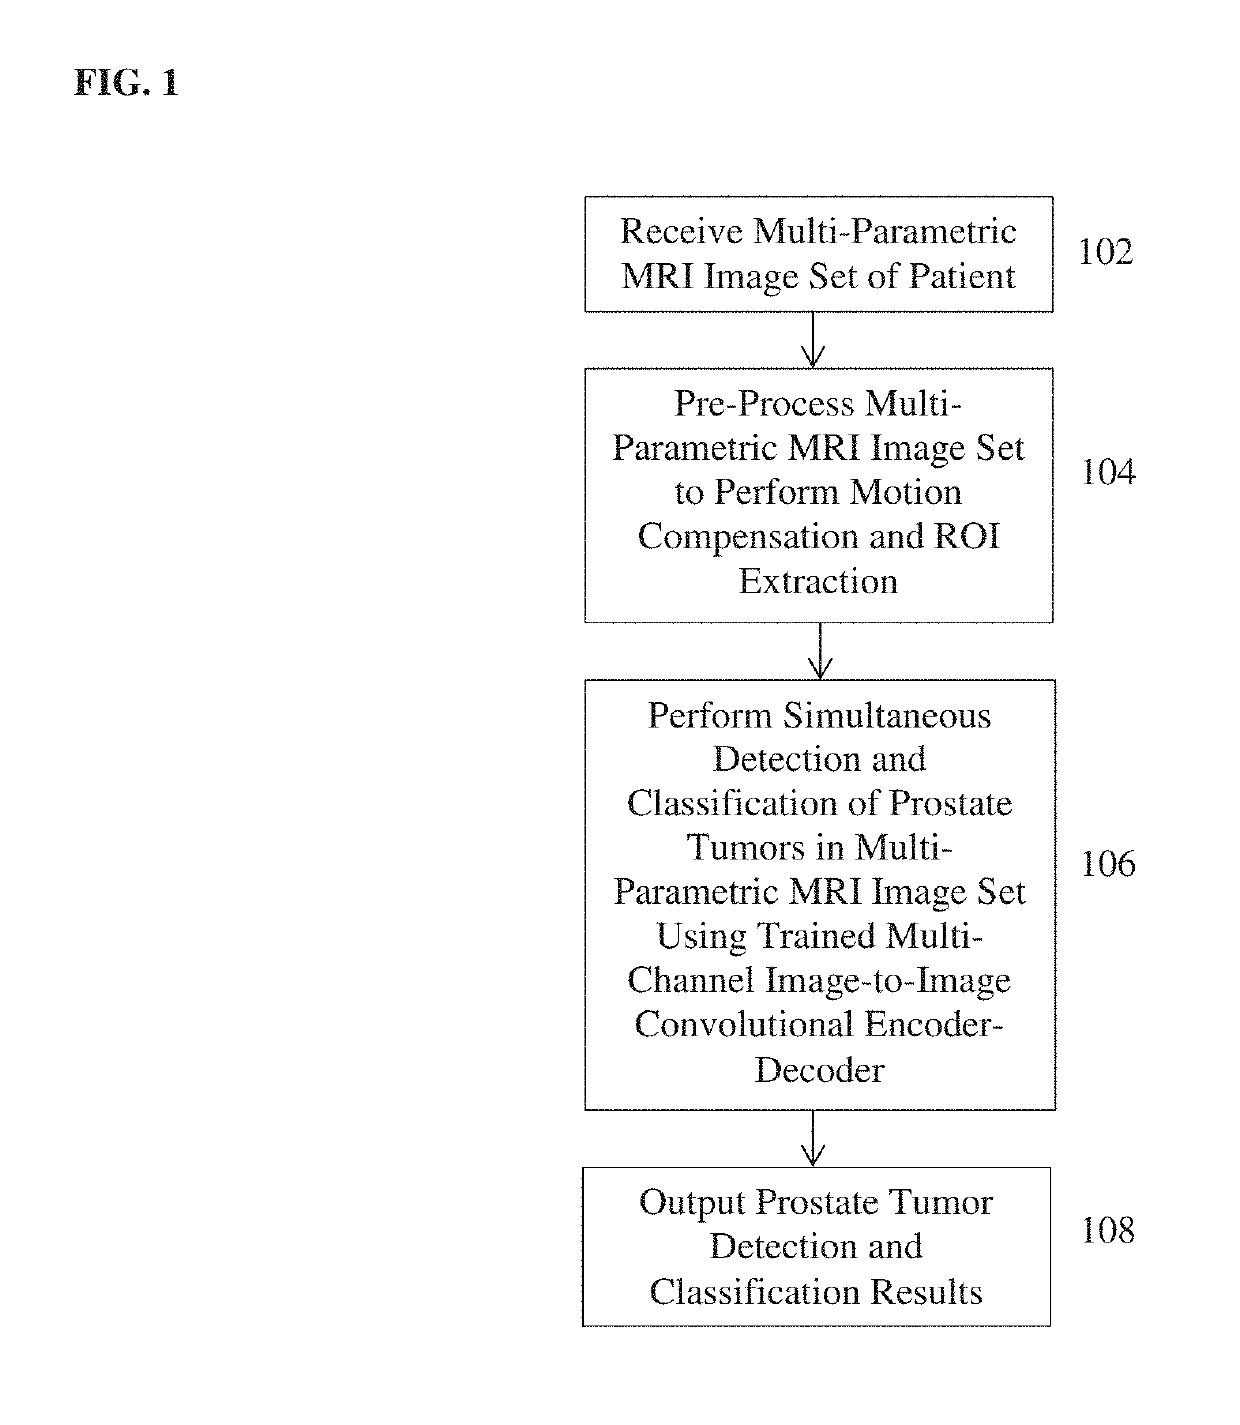 Deep convolutional encoder-decoder for prostate cancer detection and classification